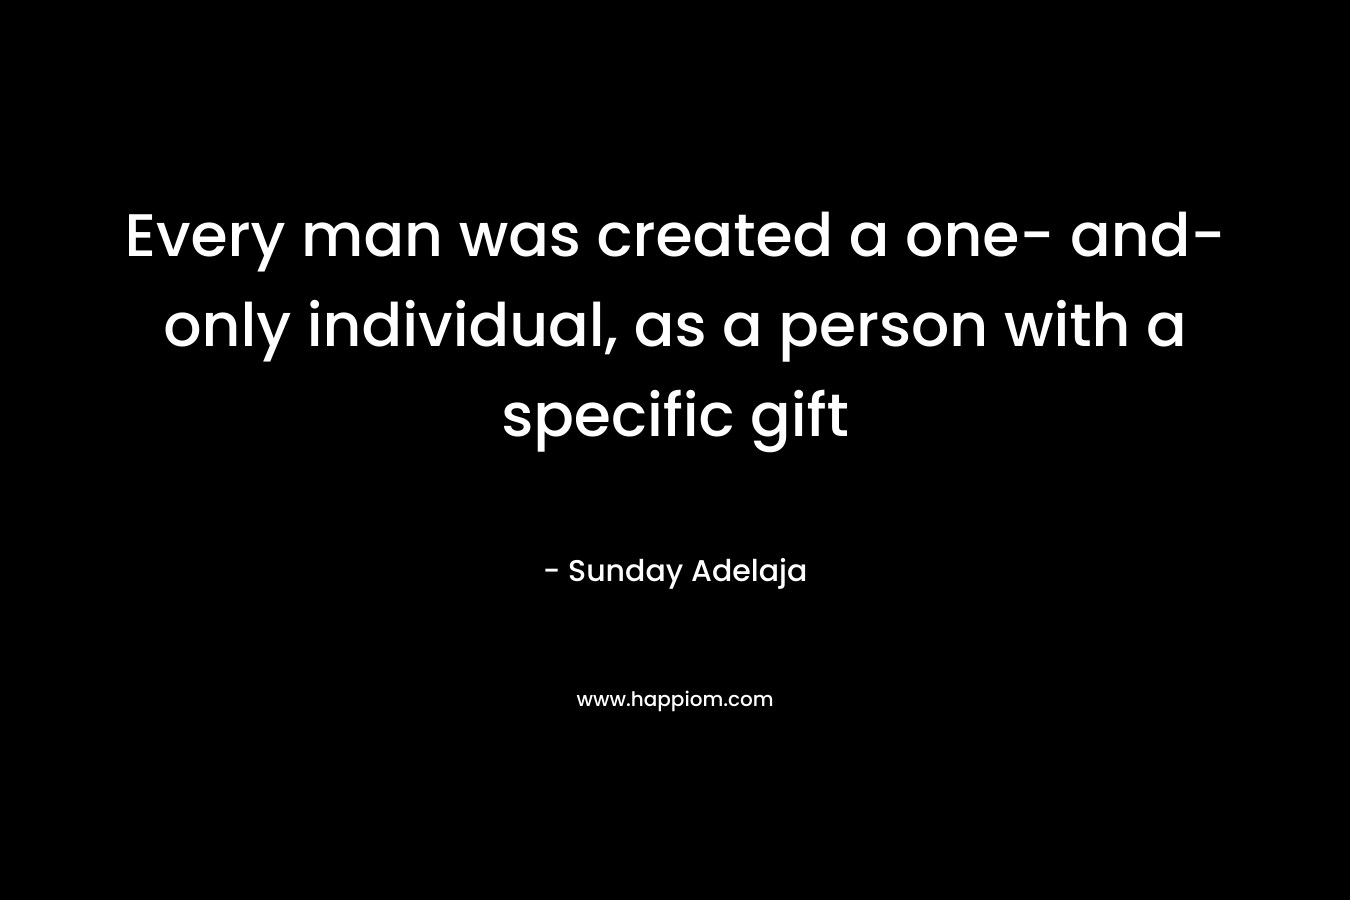 Every man was created a one- and- only individual, as a person with a specific gift